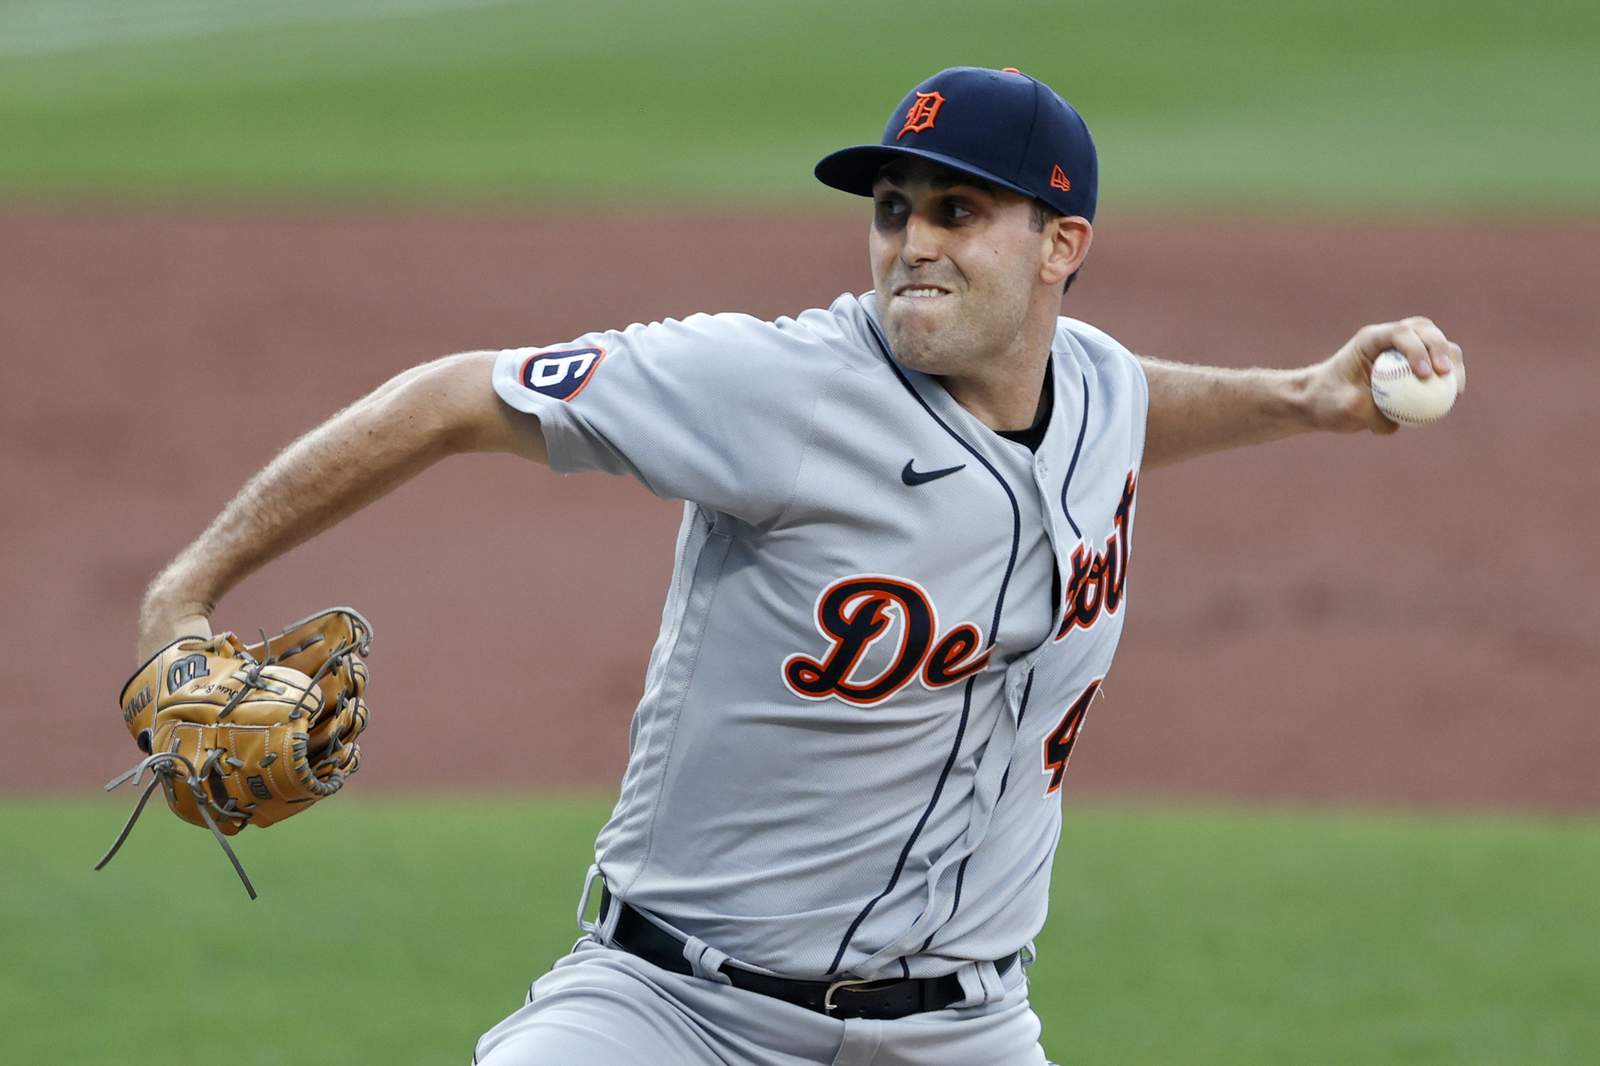 Cabrera's homer lifts Tigers to doubleheader sweep of Twins